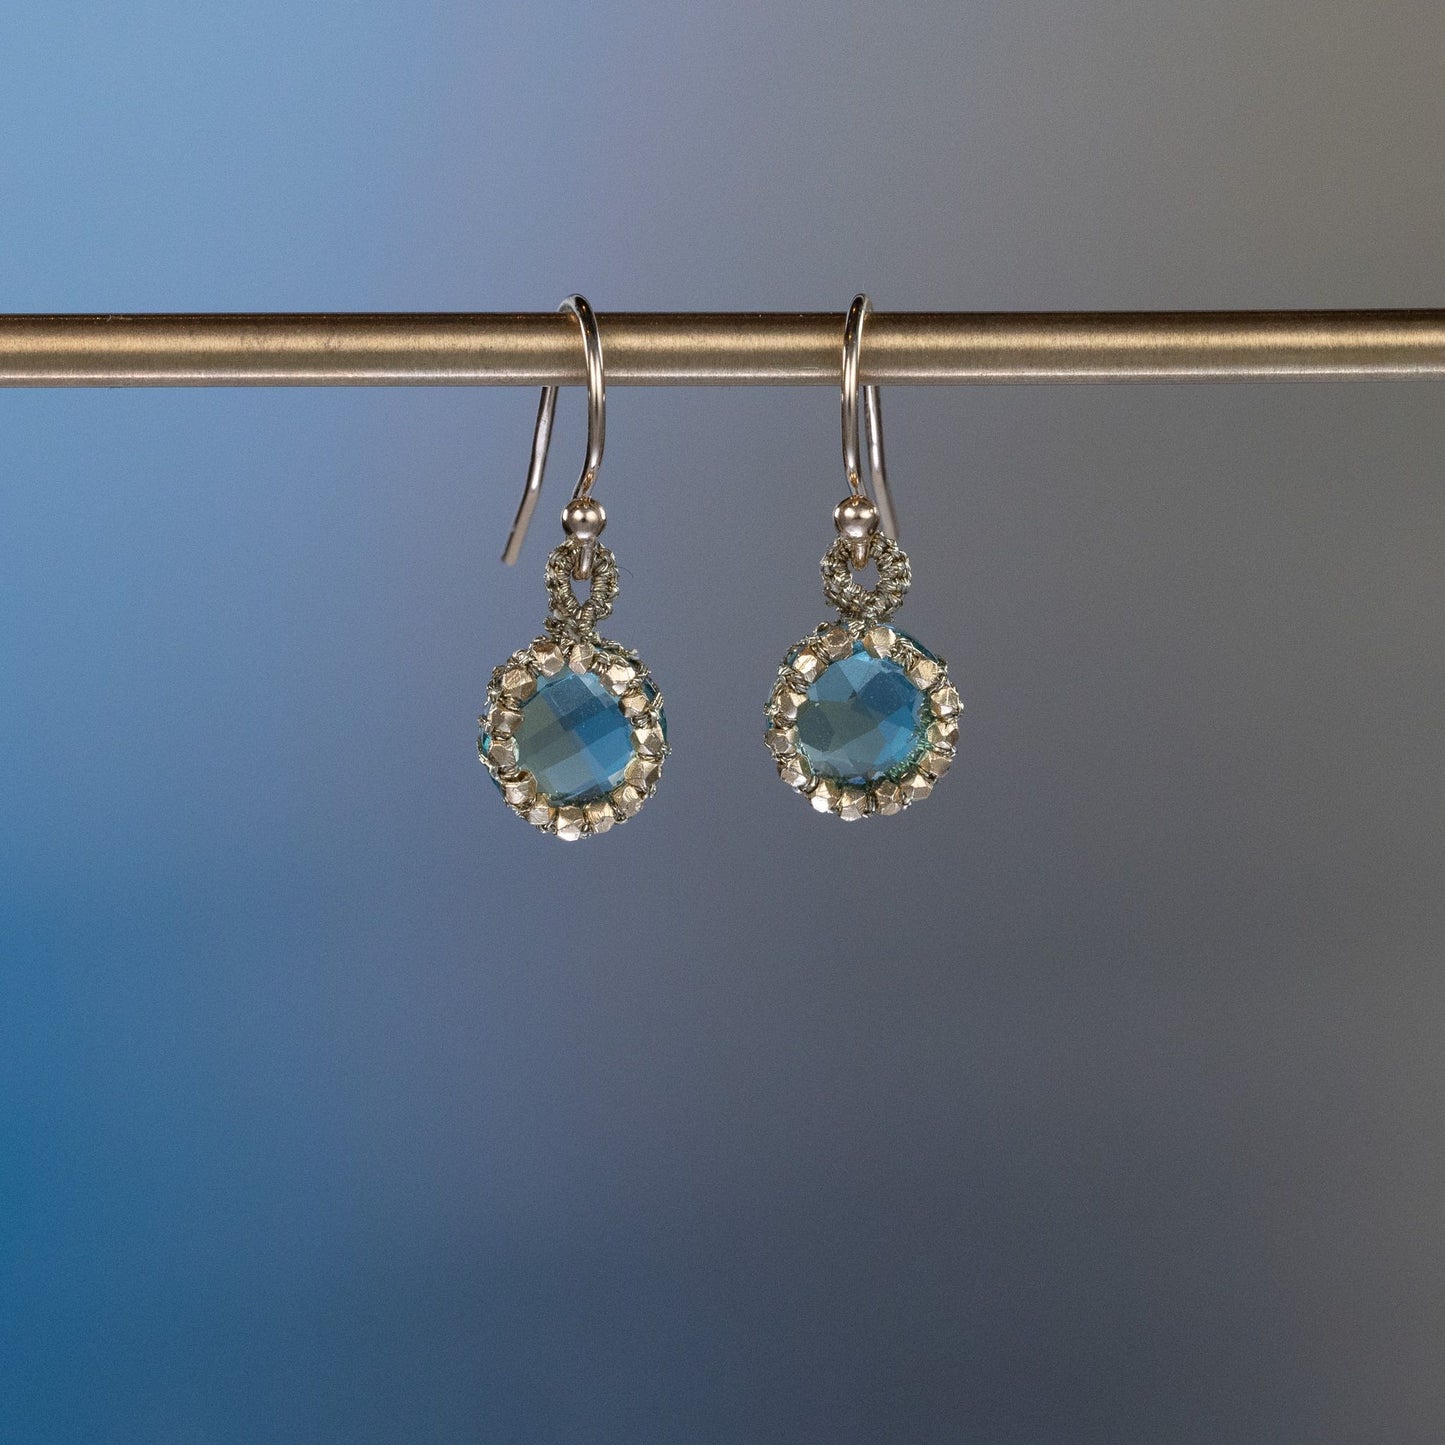 Danielle Welmond Caged Indicolite Earrings with Nugget Orbit